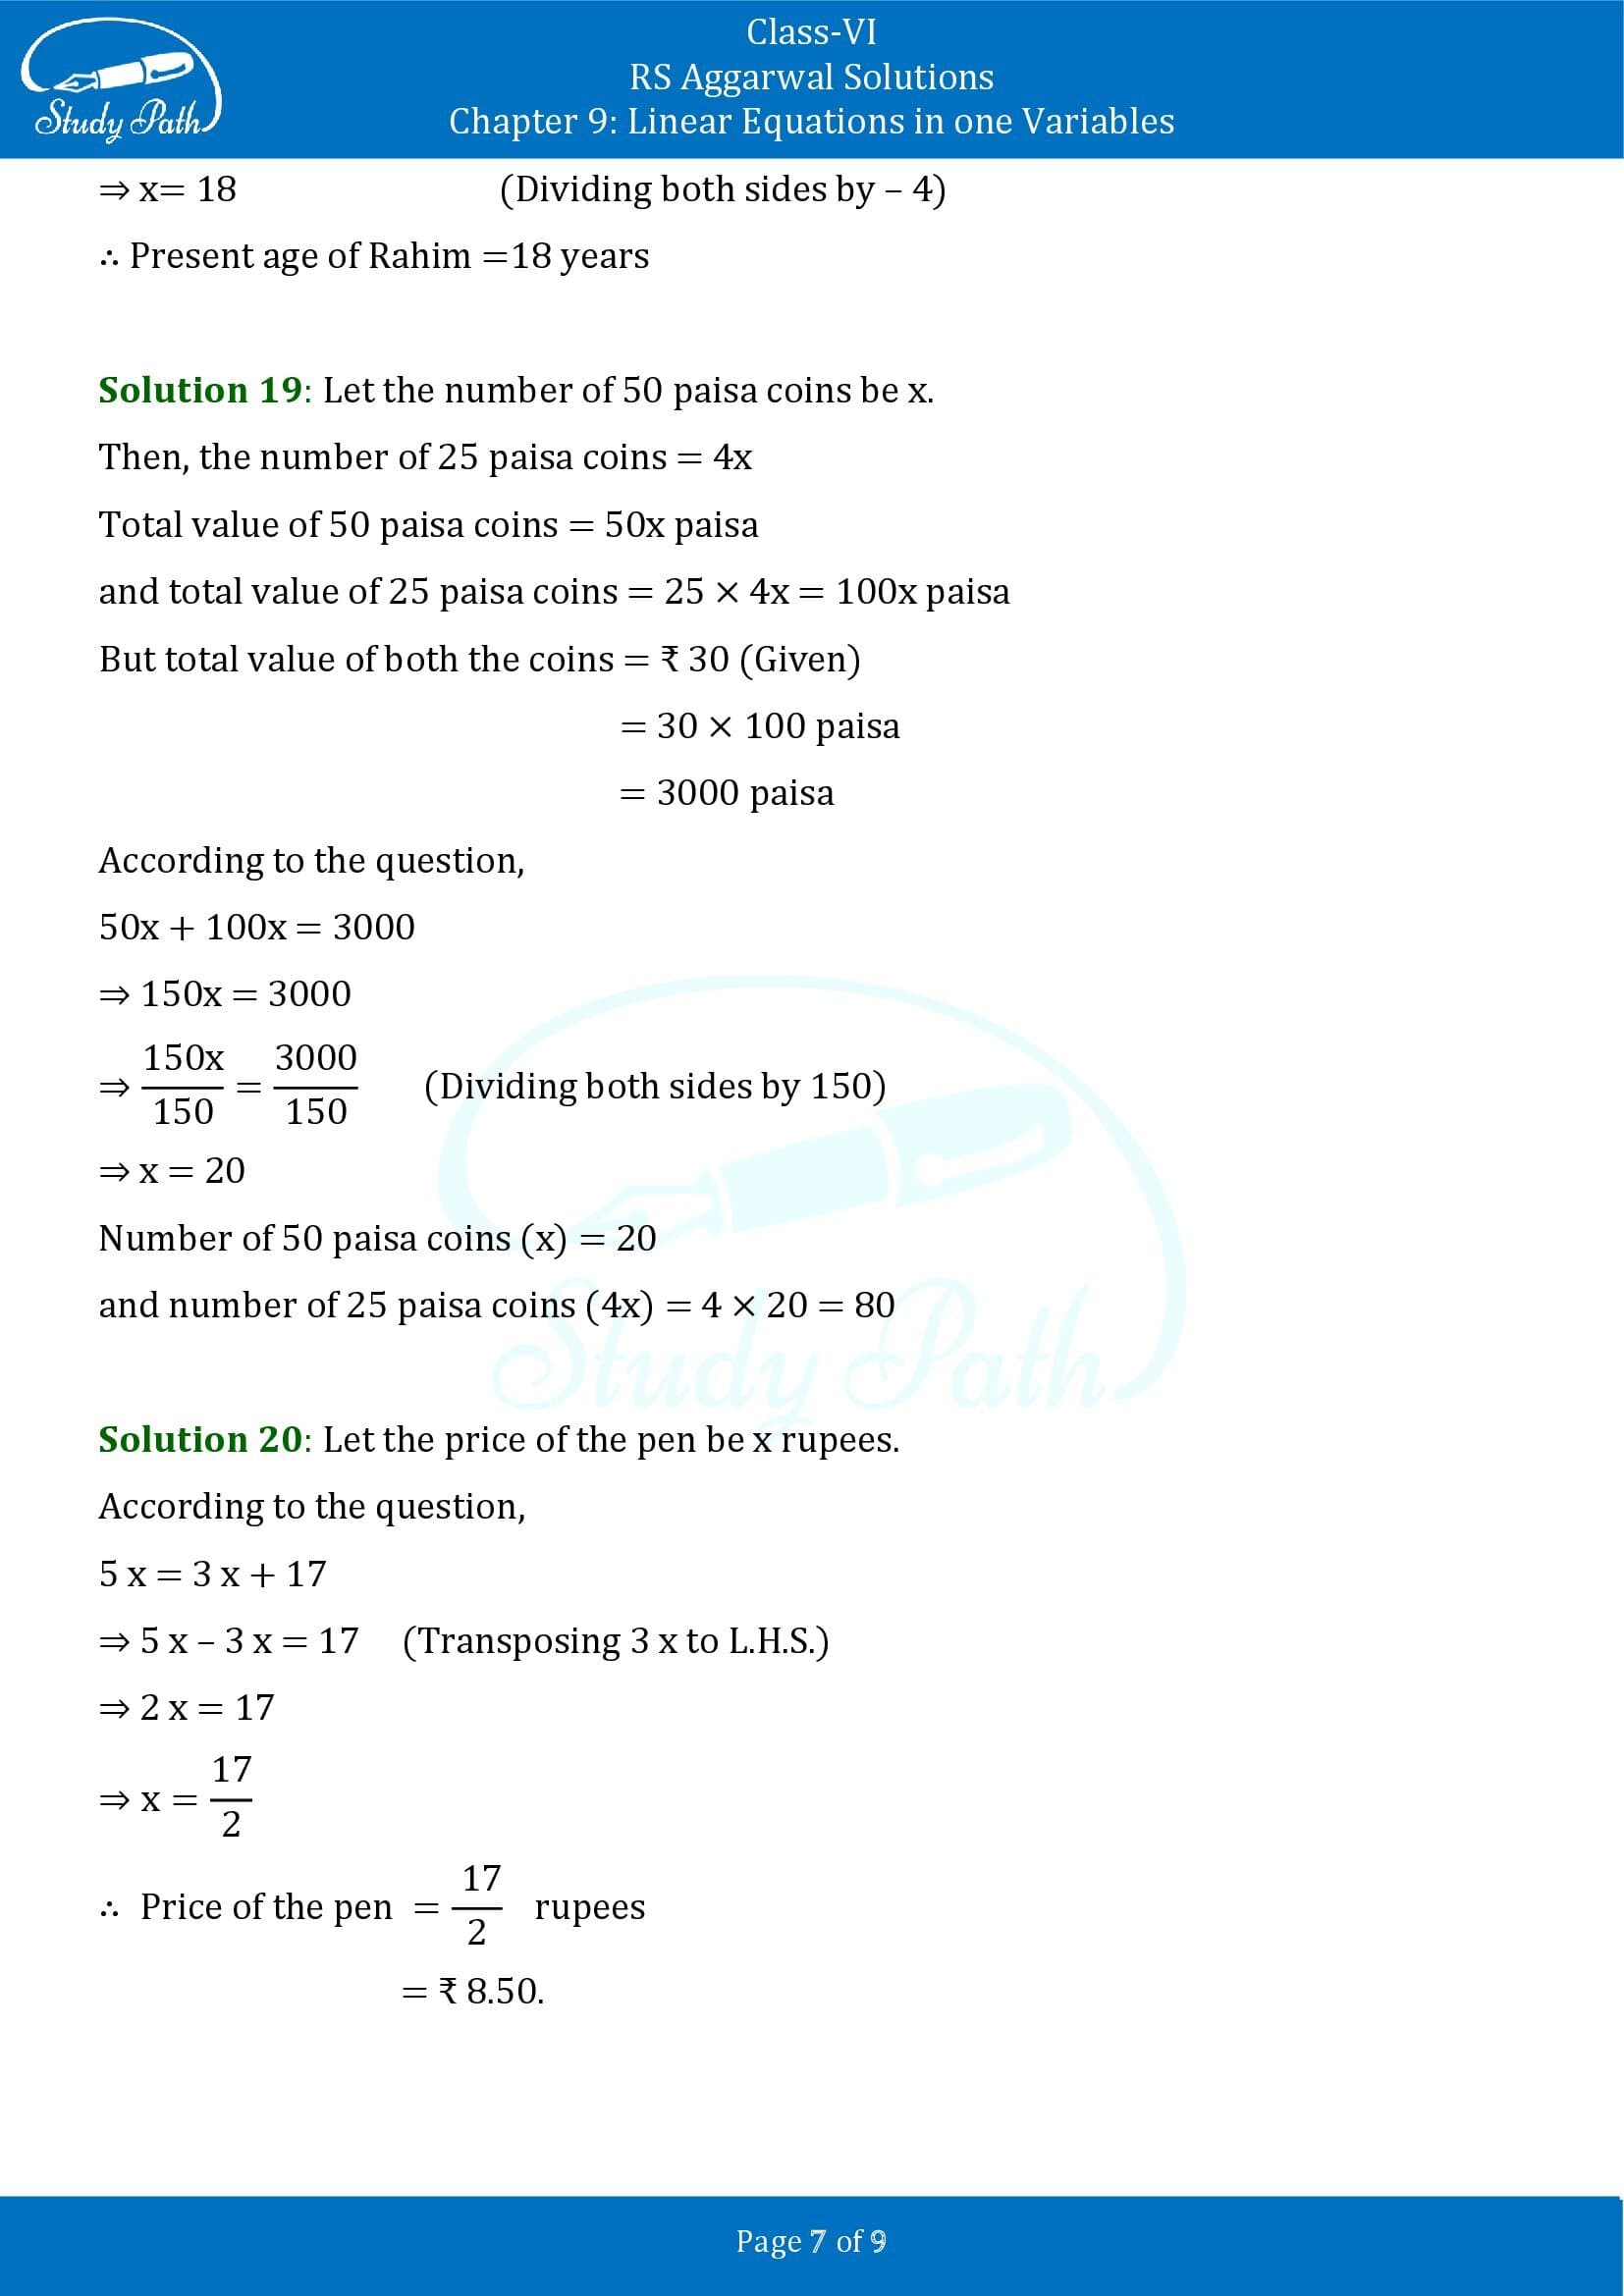 RS Aggarwal Solutions Class 6 Chapter 9 Linear Equations in One Variable Exercise 9C 00007